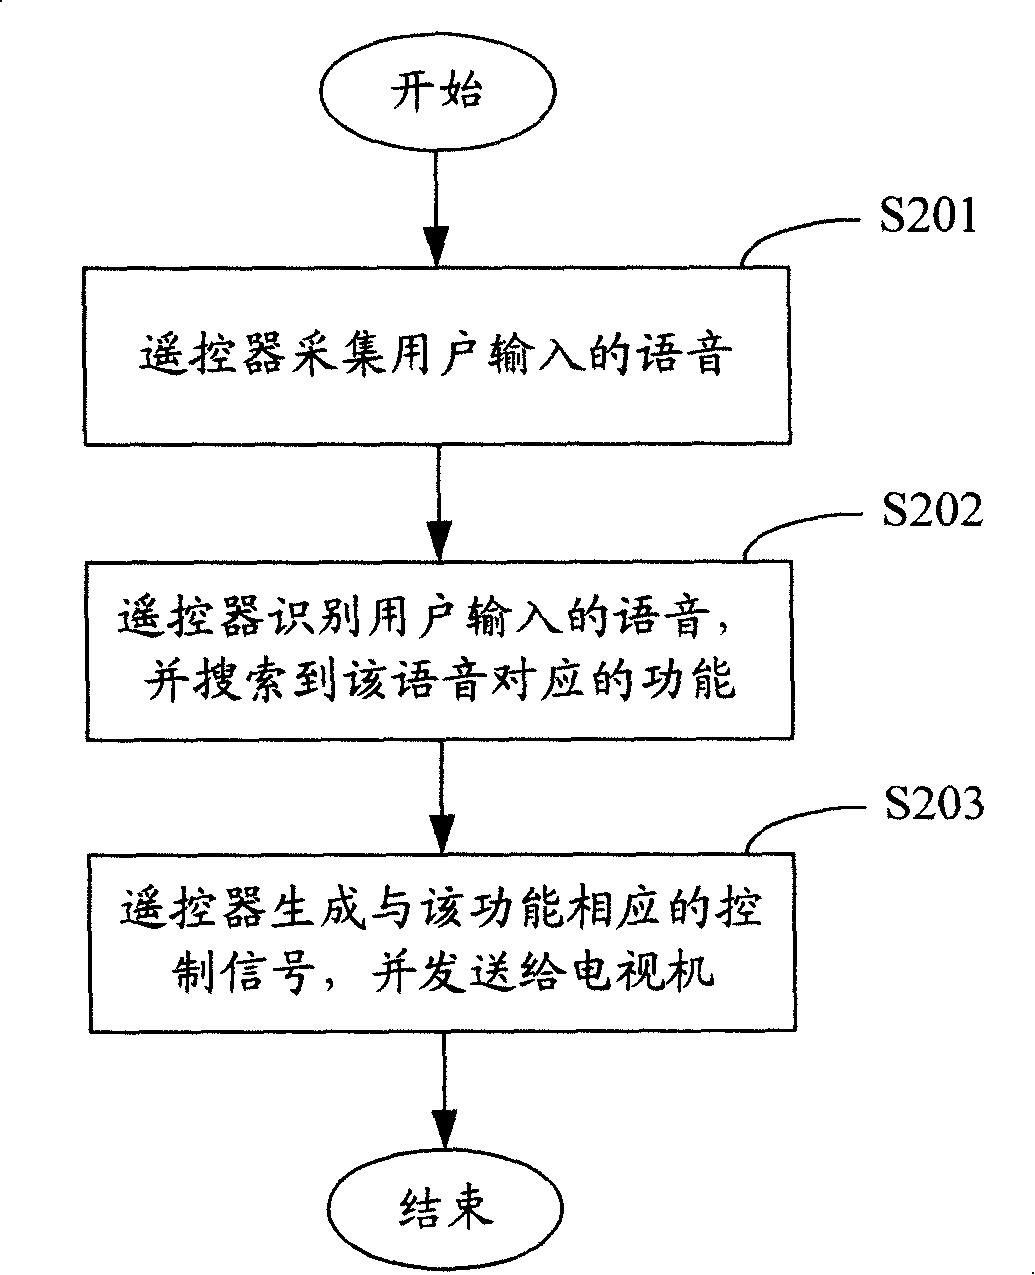 Method, system and apparatus for remote control for TV through voice